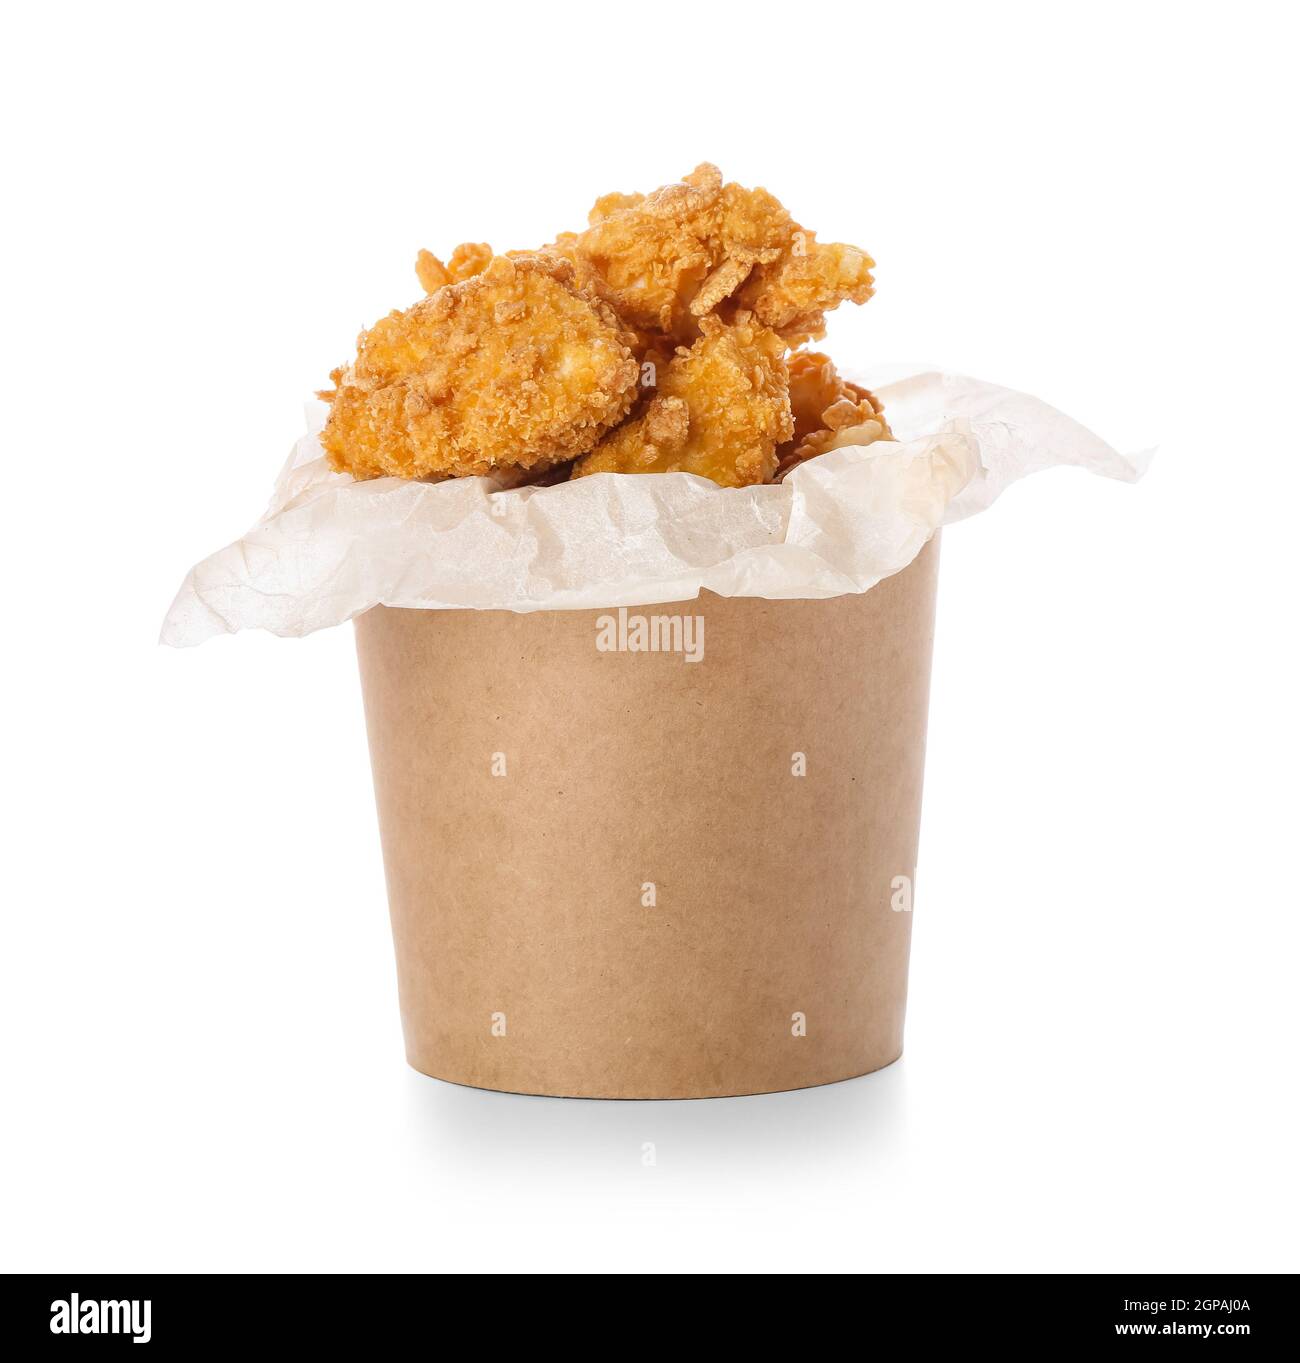 Paper bucket with tasty fried popcorn chicken on white background Stock Photo